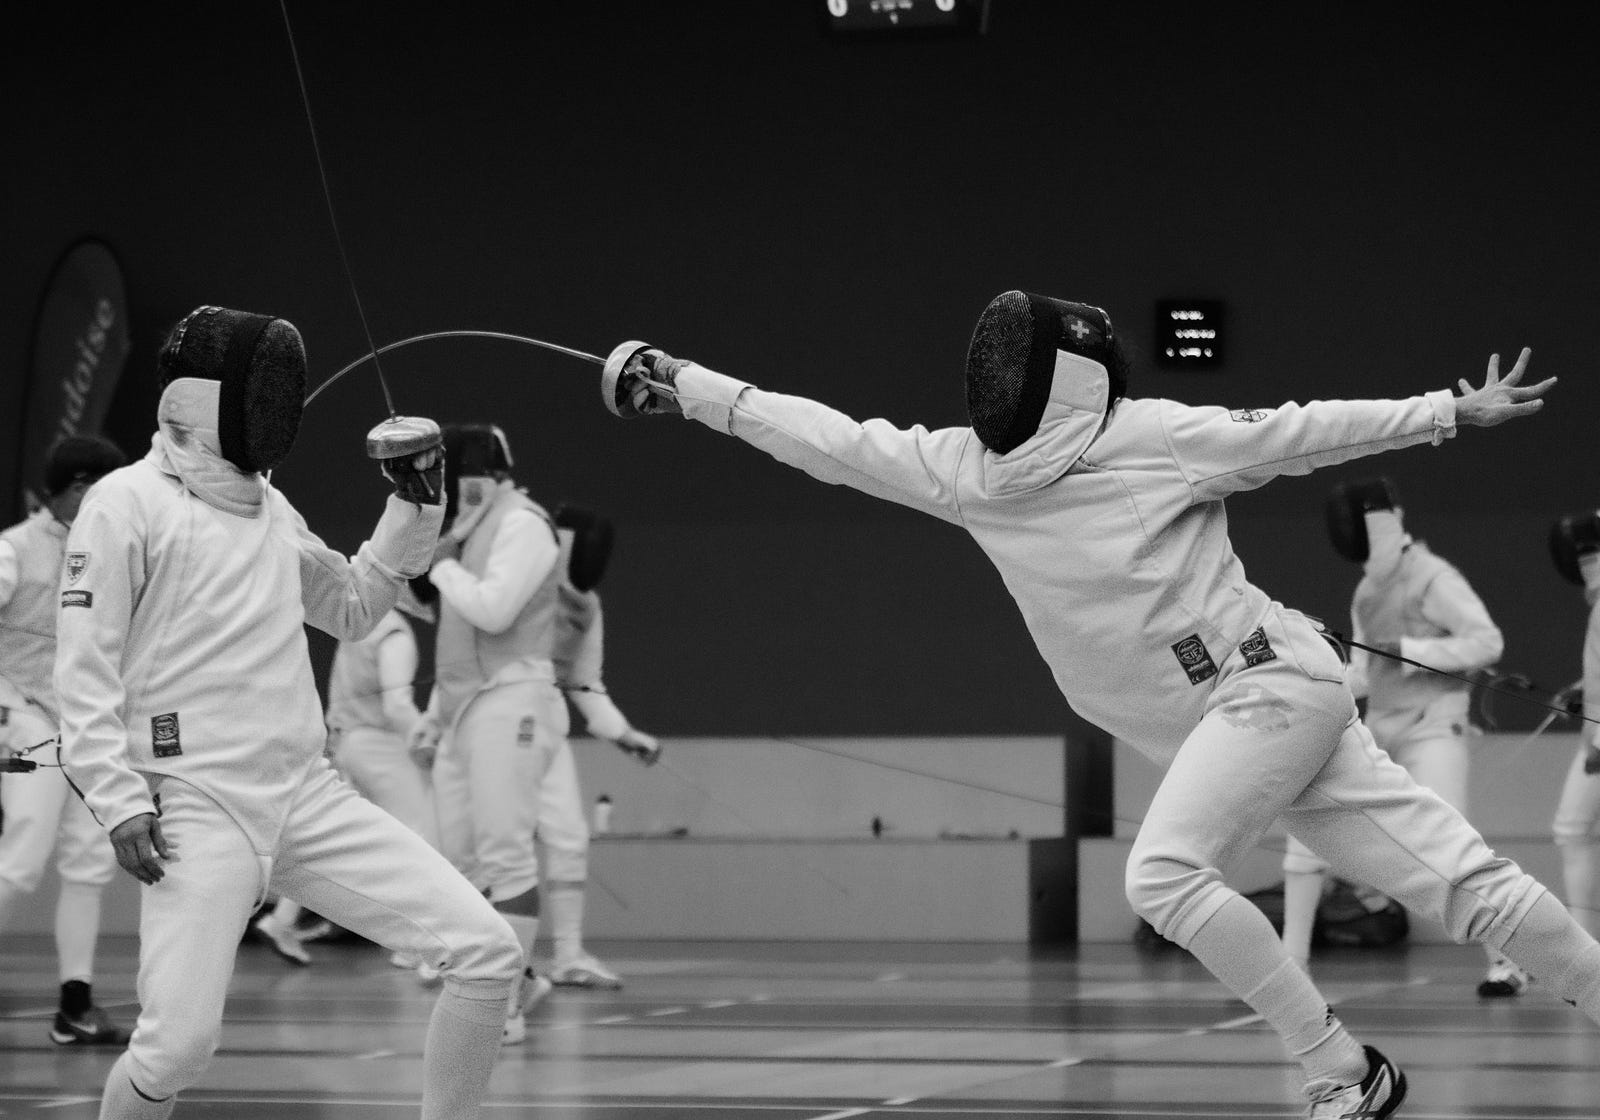 Foil fencers compete. Low-intensity exercise primarily relies on the aerobic energy system, which trains the body to efficiently utilize fat as a fuel source.